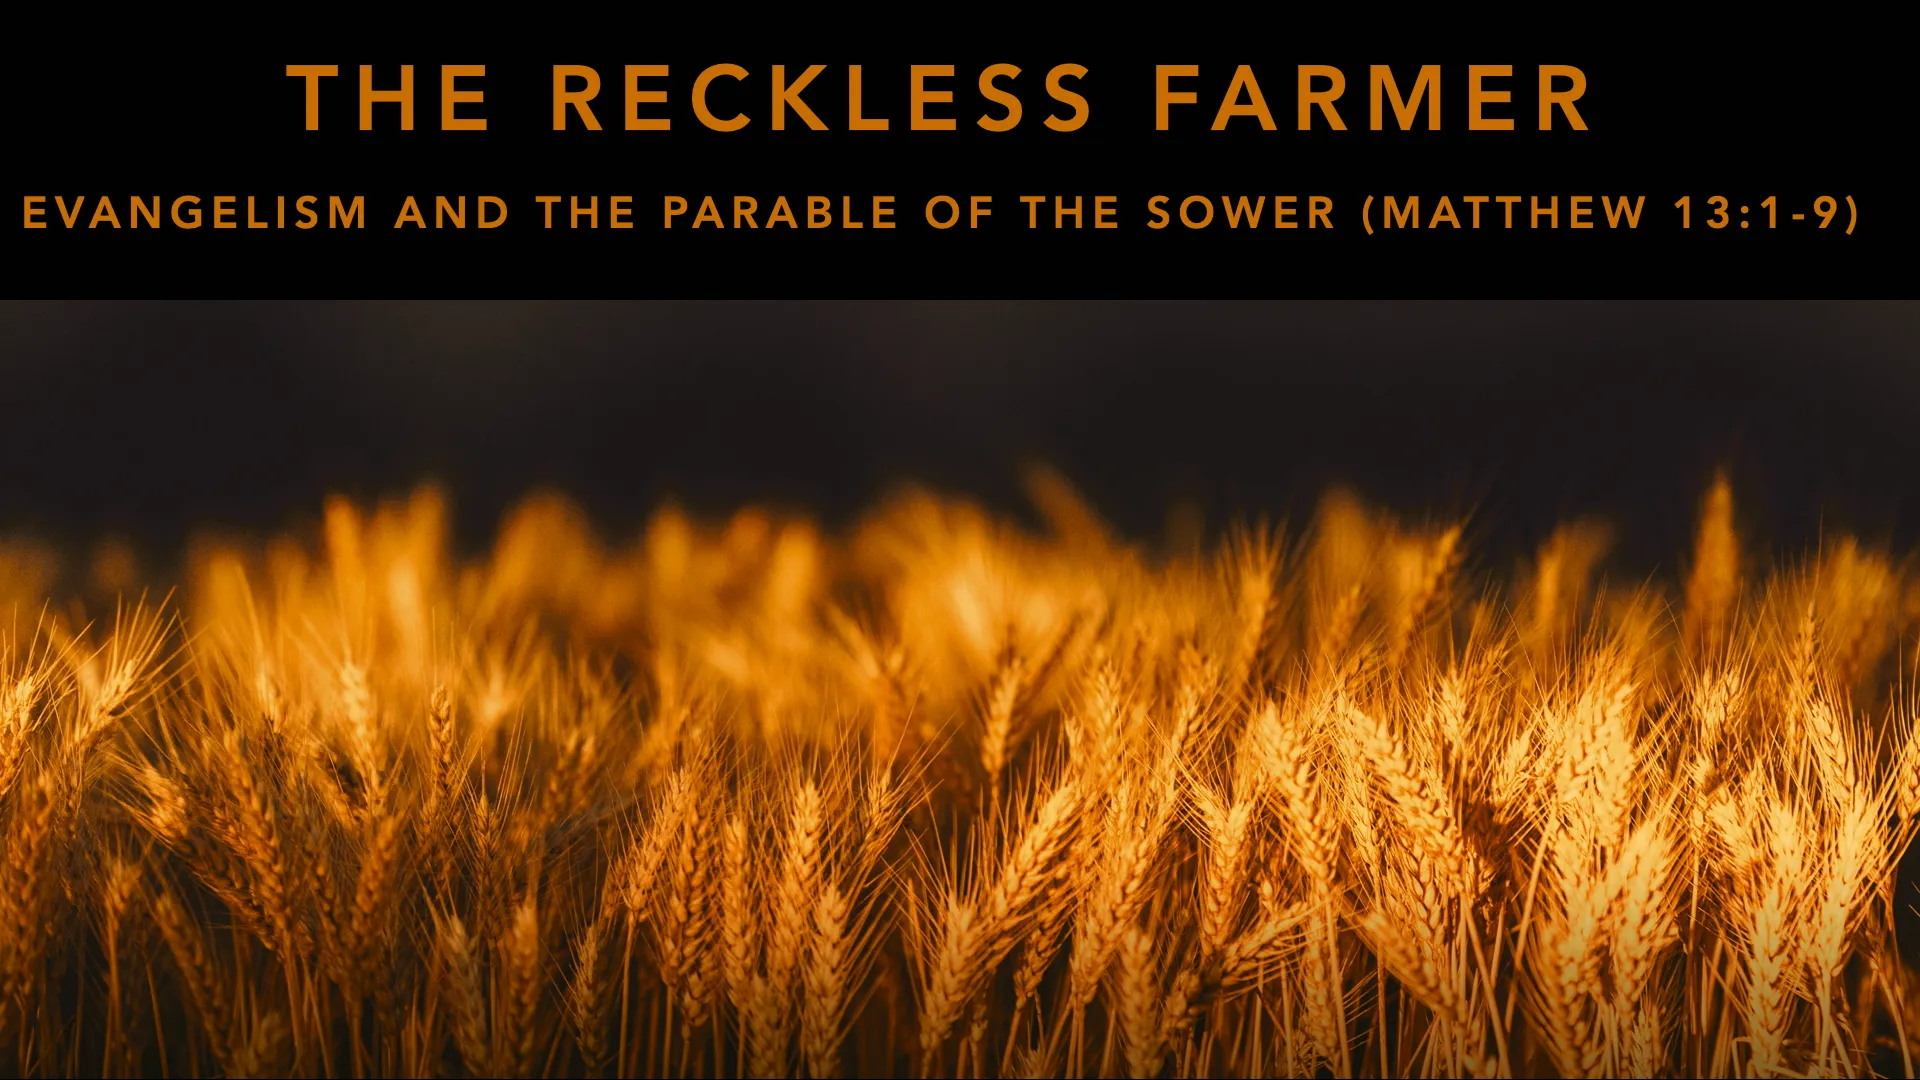 The Reckless Farmer